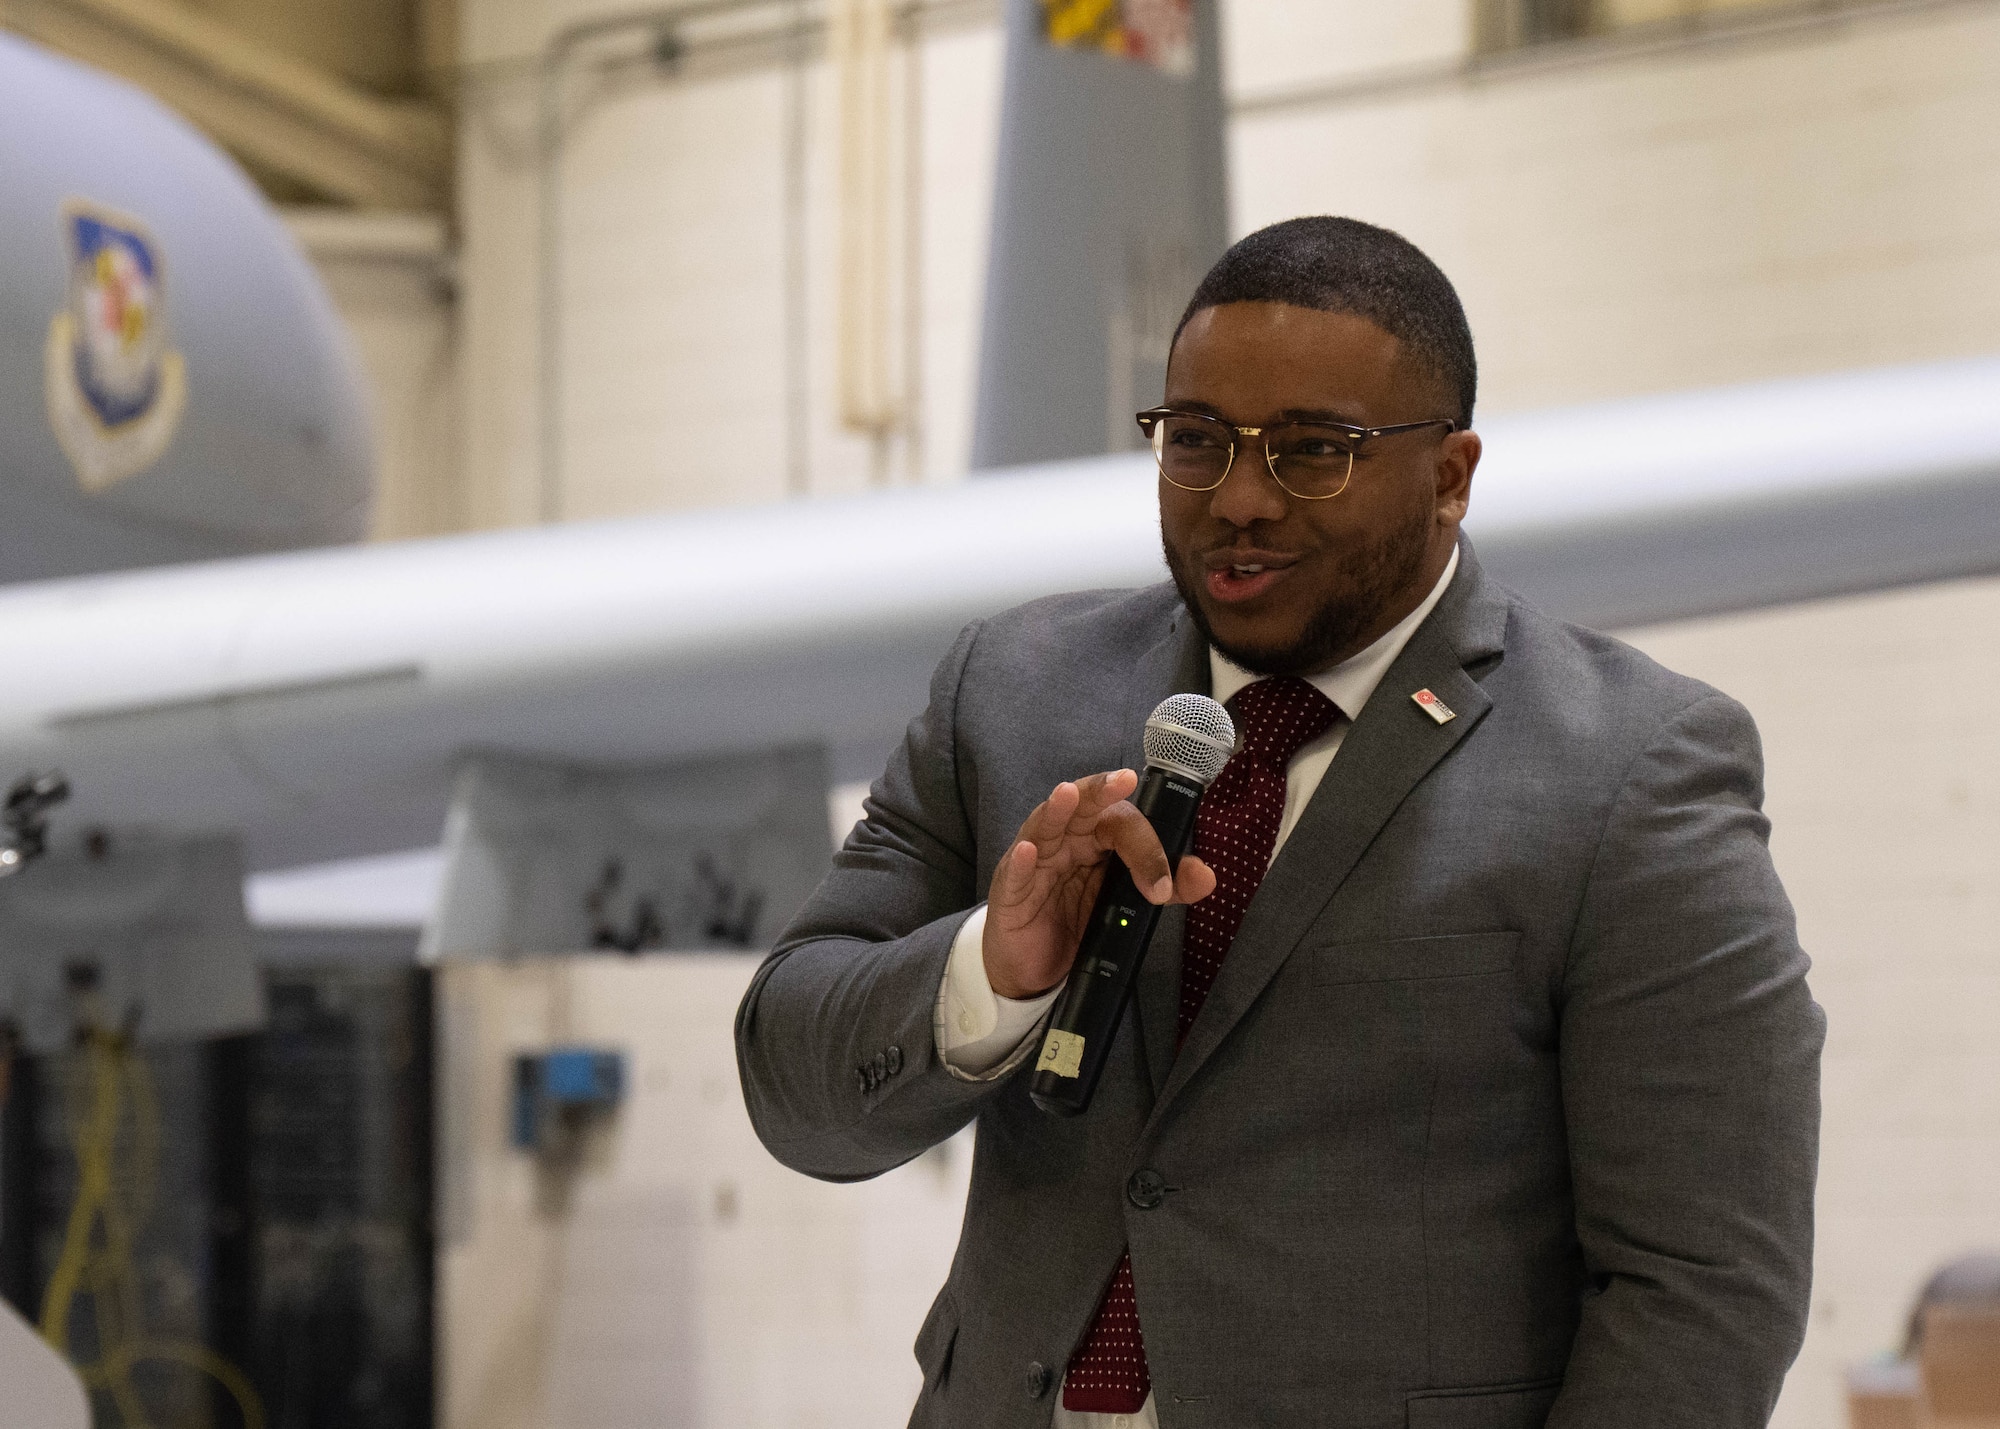 Mr. Harold Fowler, Martin State Airport Operations and Maintenance chief, briefs civic leaders during an engagement at Martin State Air National Guard Base, Middle River, Maryland, March 31, 2023.